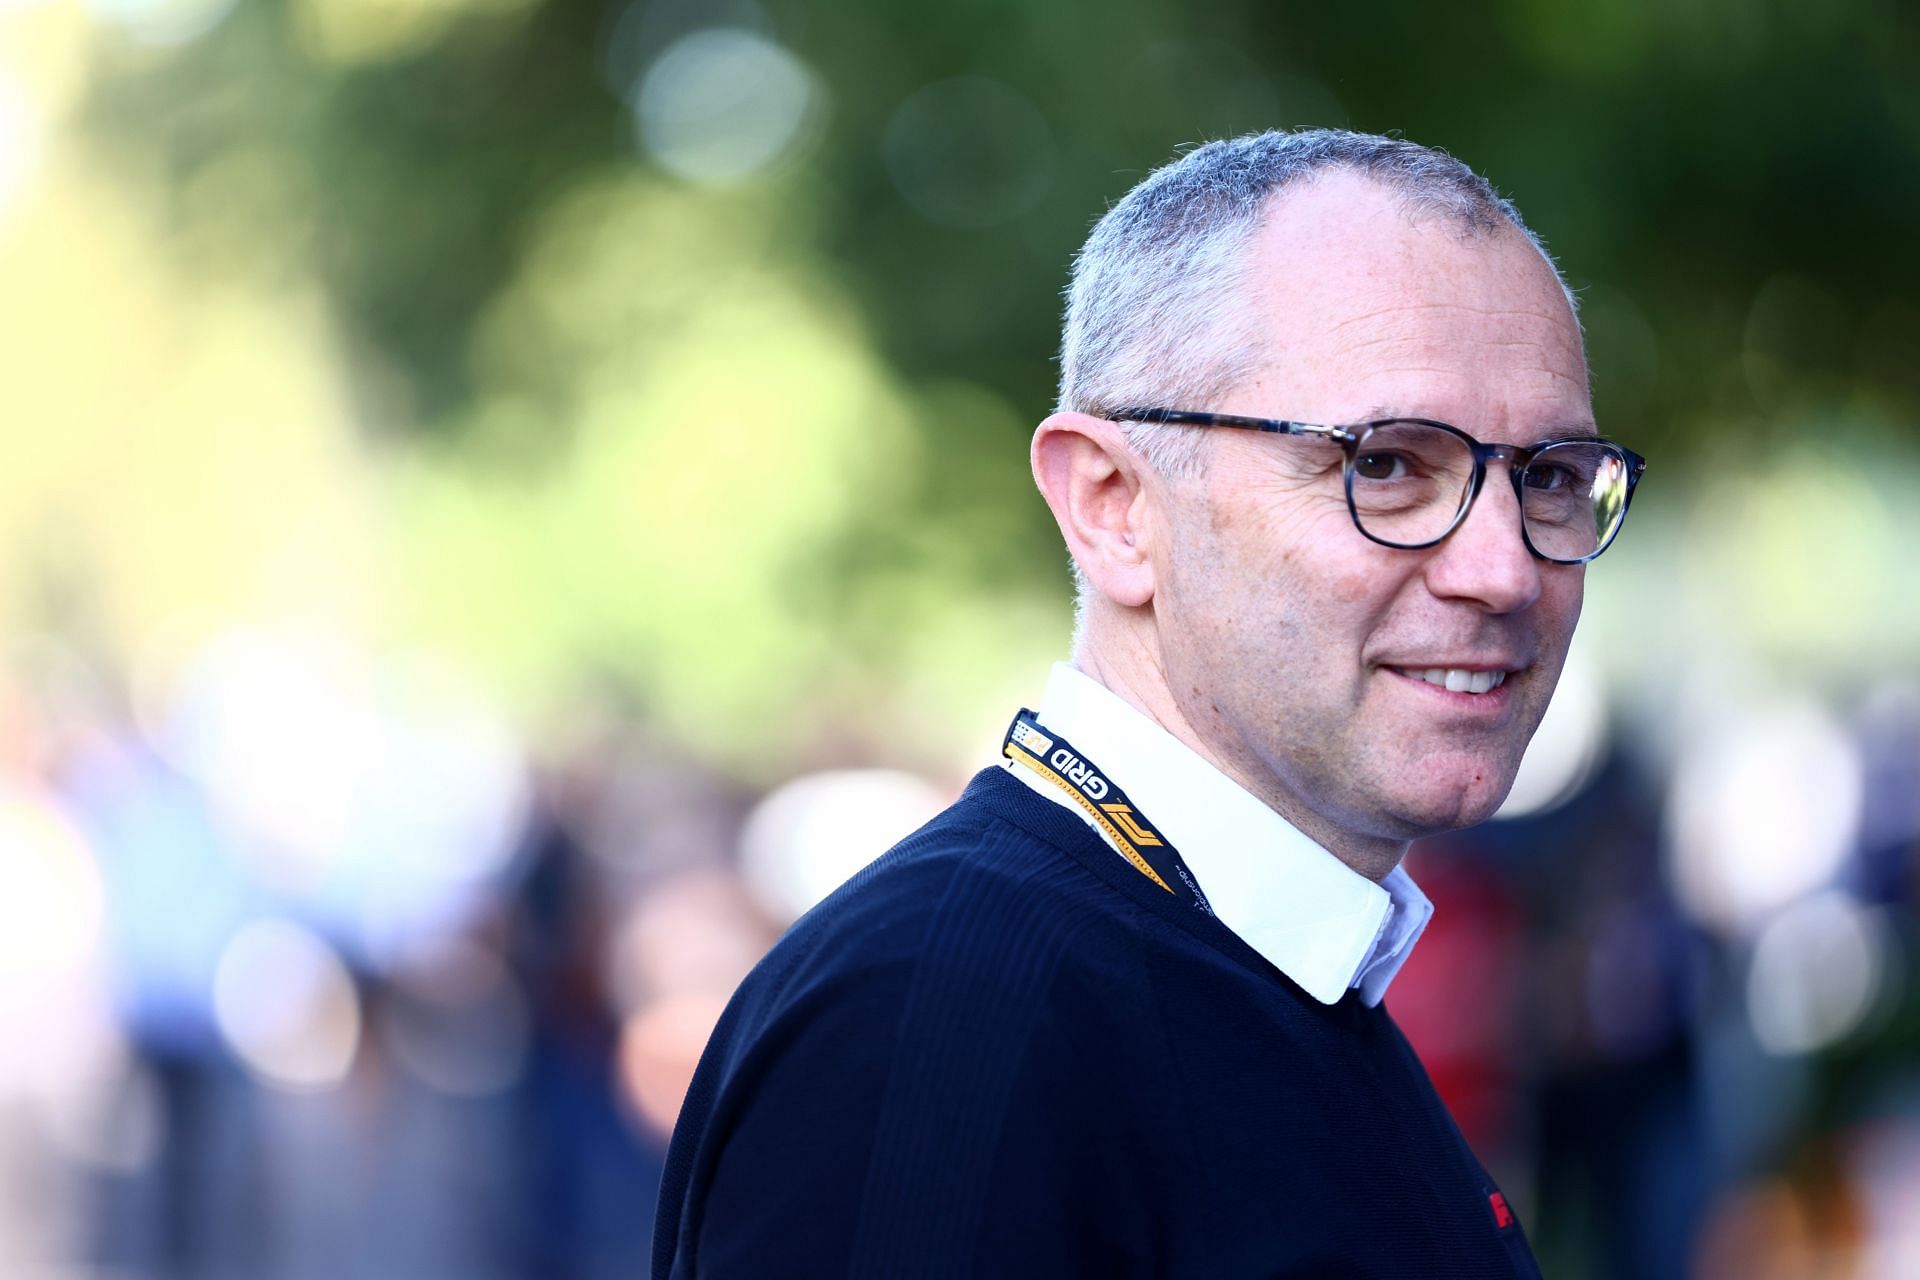 Stefano Domenicali, CEO of the Formula One Group, looks on in the Paddock during previews ahead of the F1 Grand Prix of Australia at Melbourne Grand Prix Circuit on April 07, 2022 in Melbourne, Australia. (Photo by Mark Thompson/Getty Images)